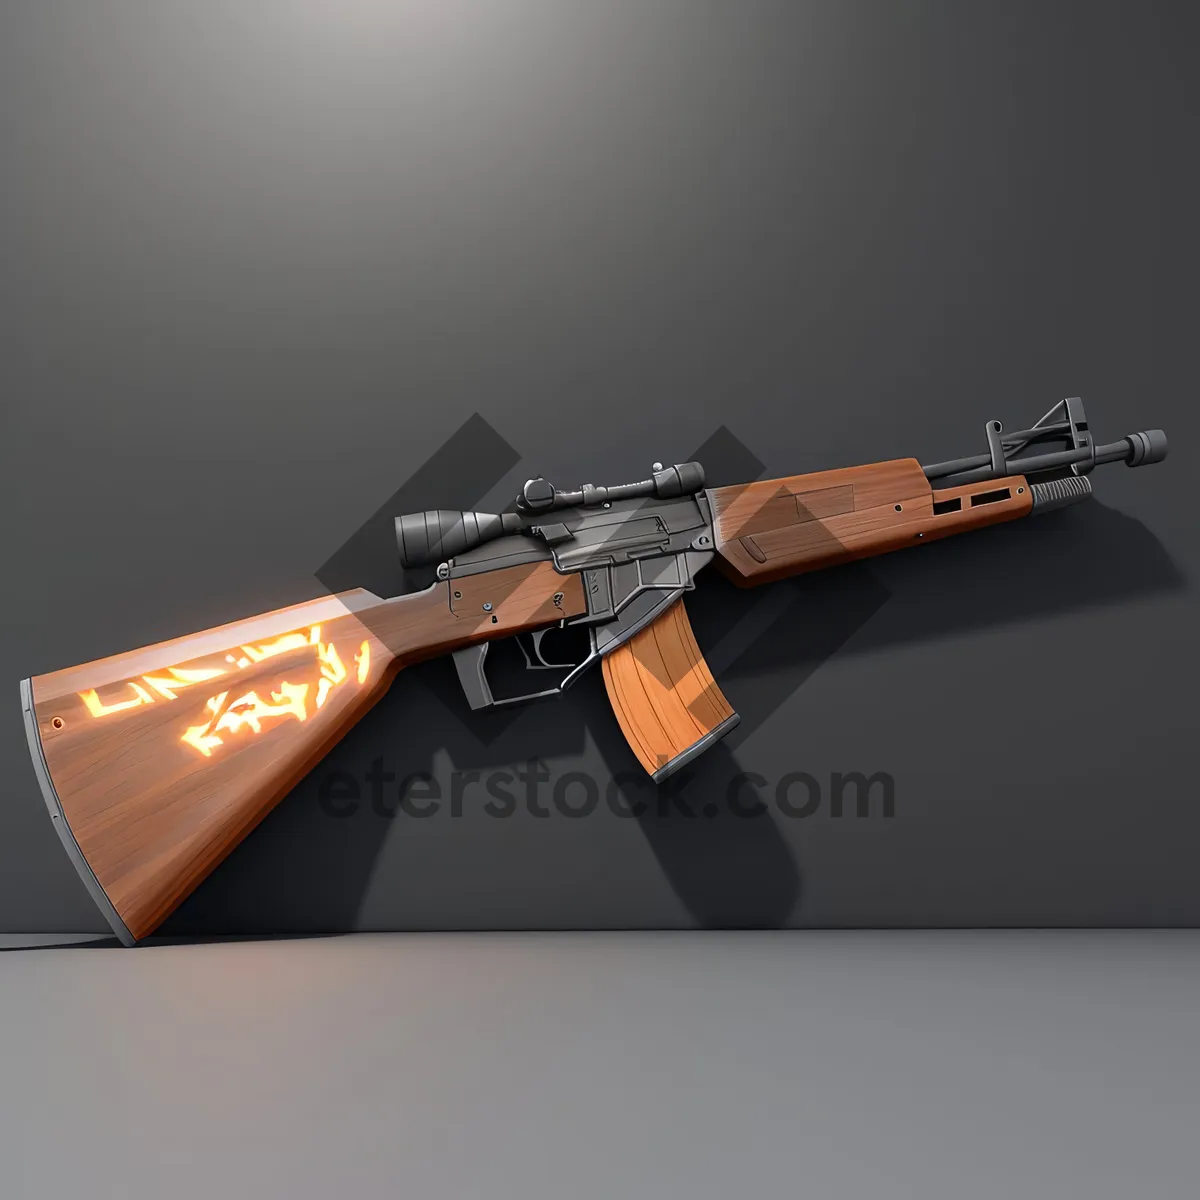 Picture of Metal Firearm: Assault Rifle - Powerful, reliable weapon of choice.